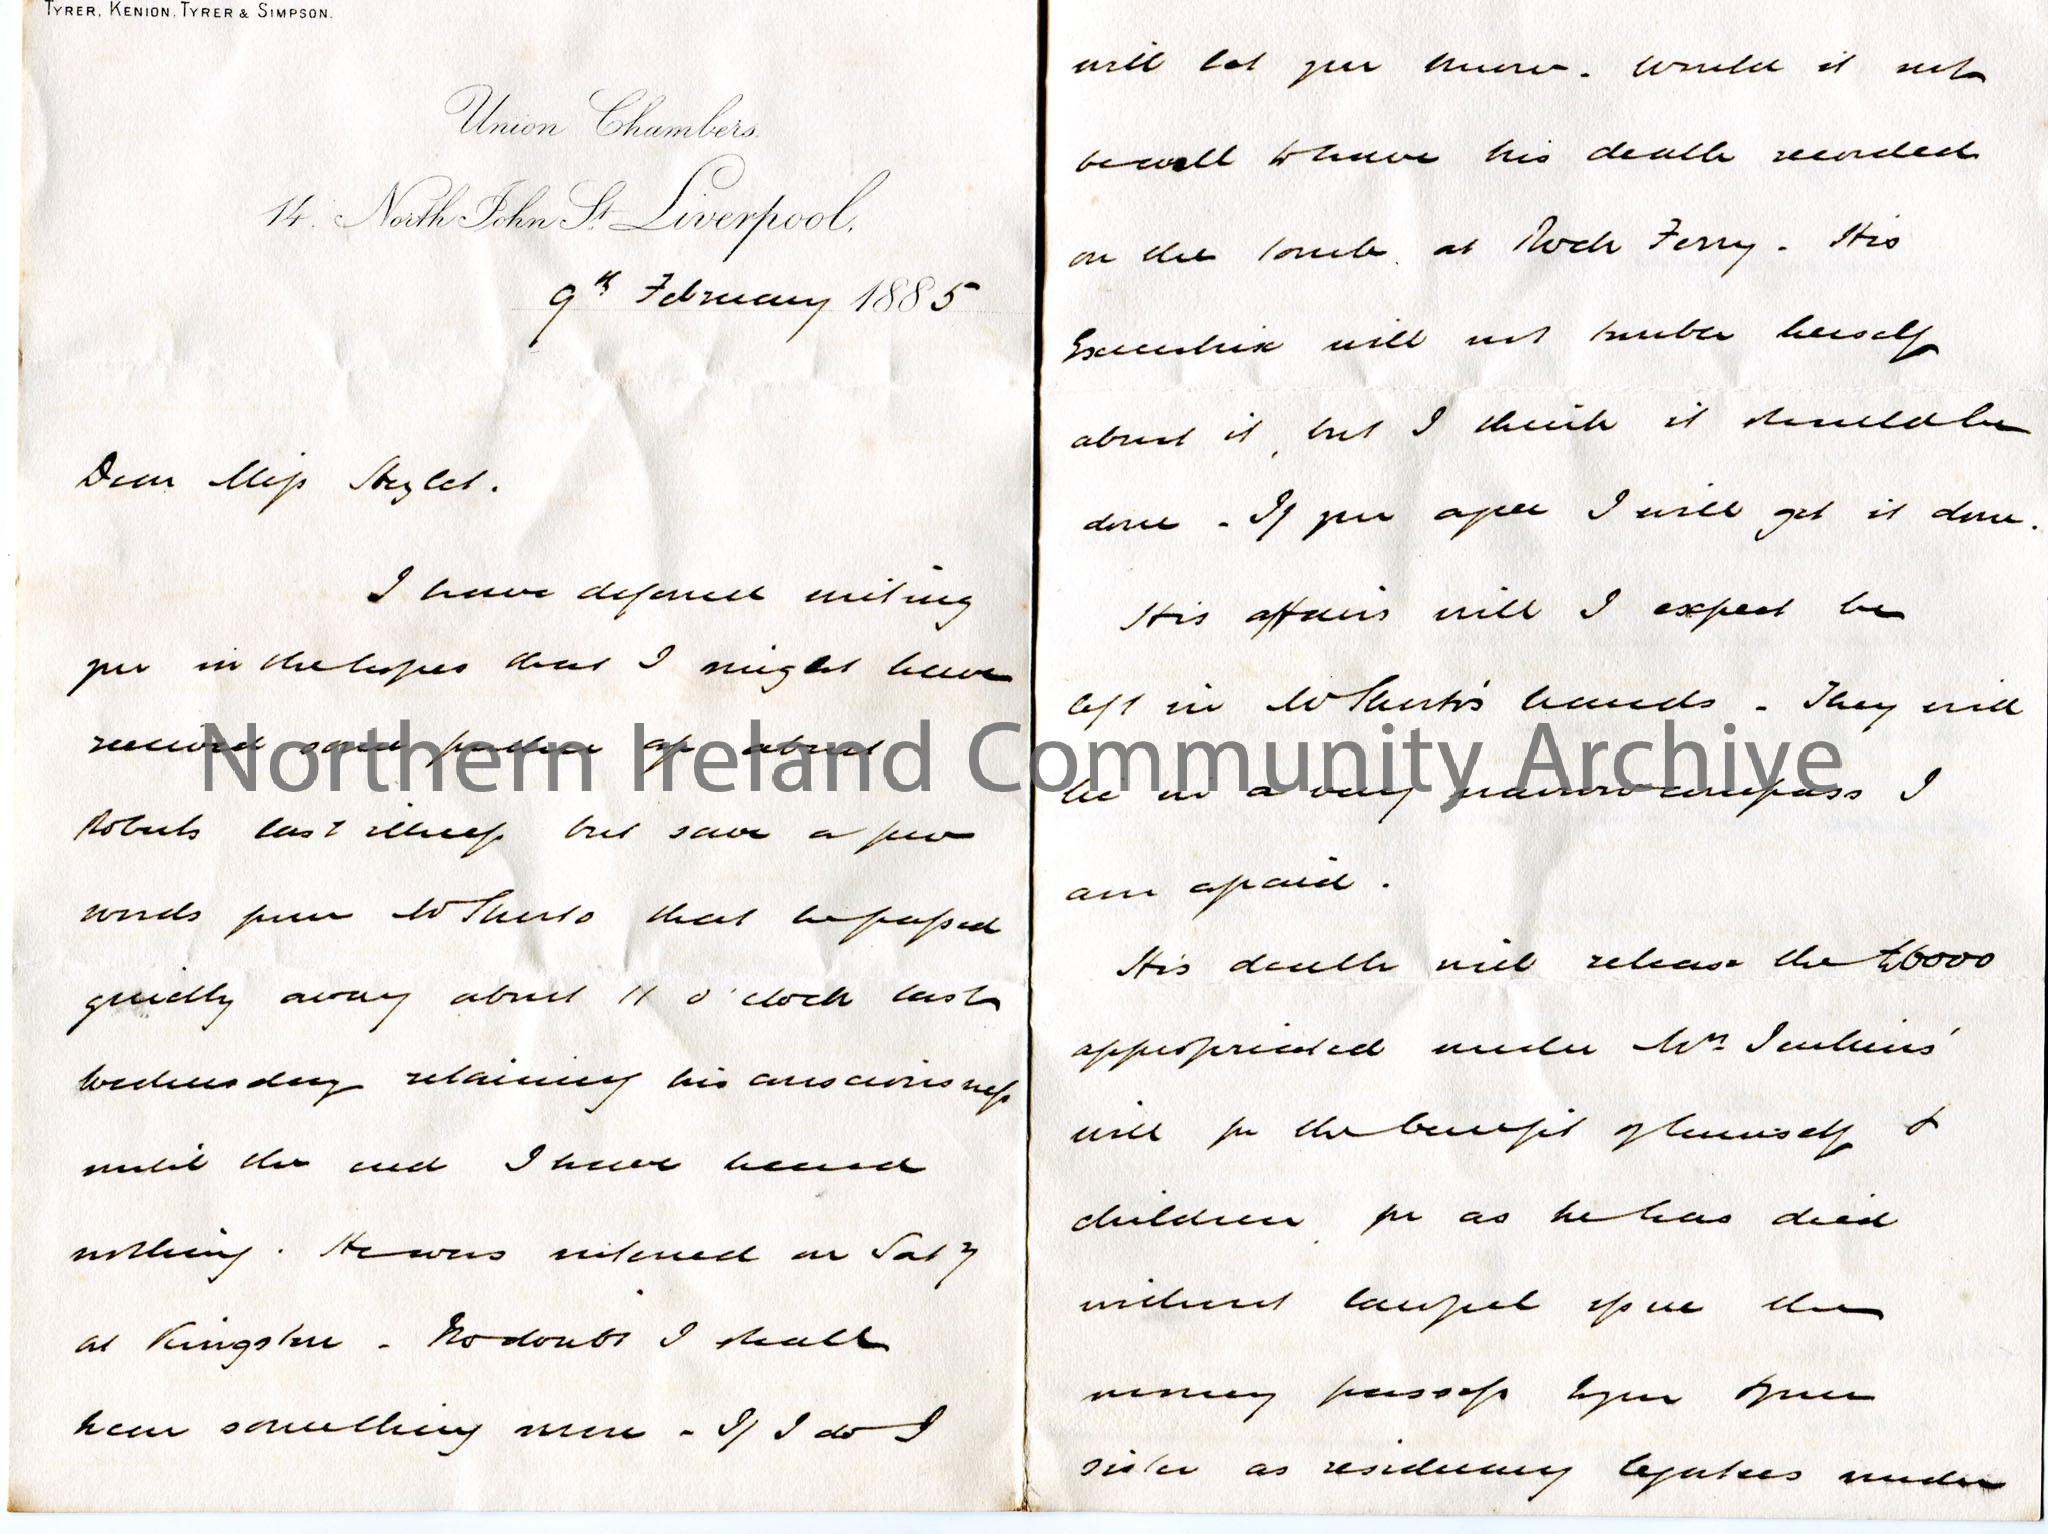 Handwritten letter to Miss Hezlet at Bovagh, Aghadowey, Co. Derry. Writing re the death of Roberts.